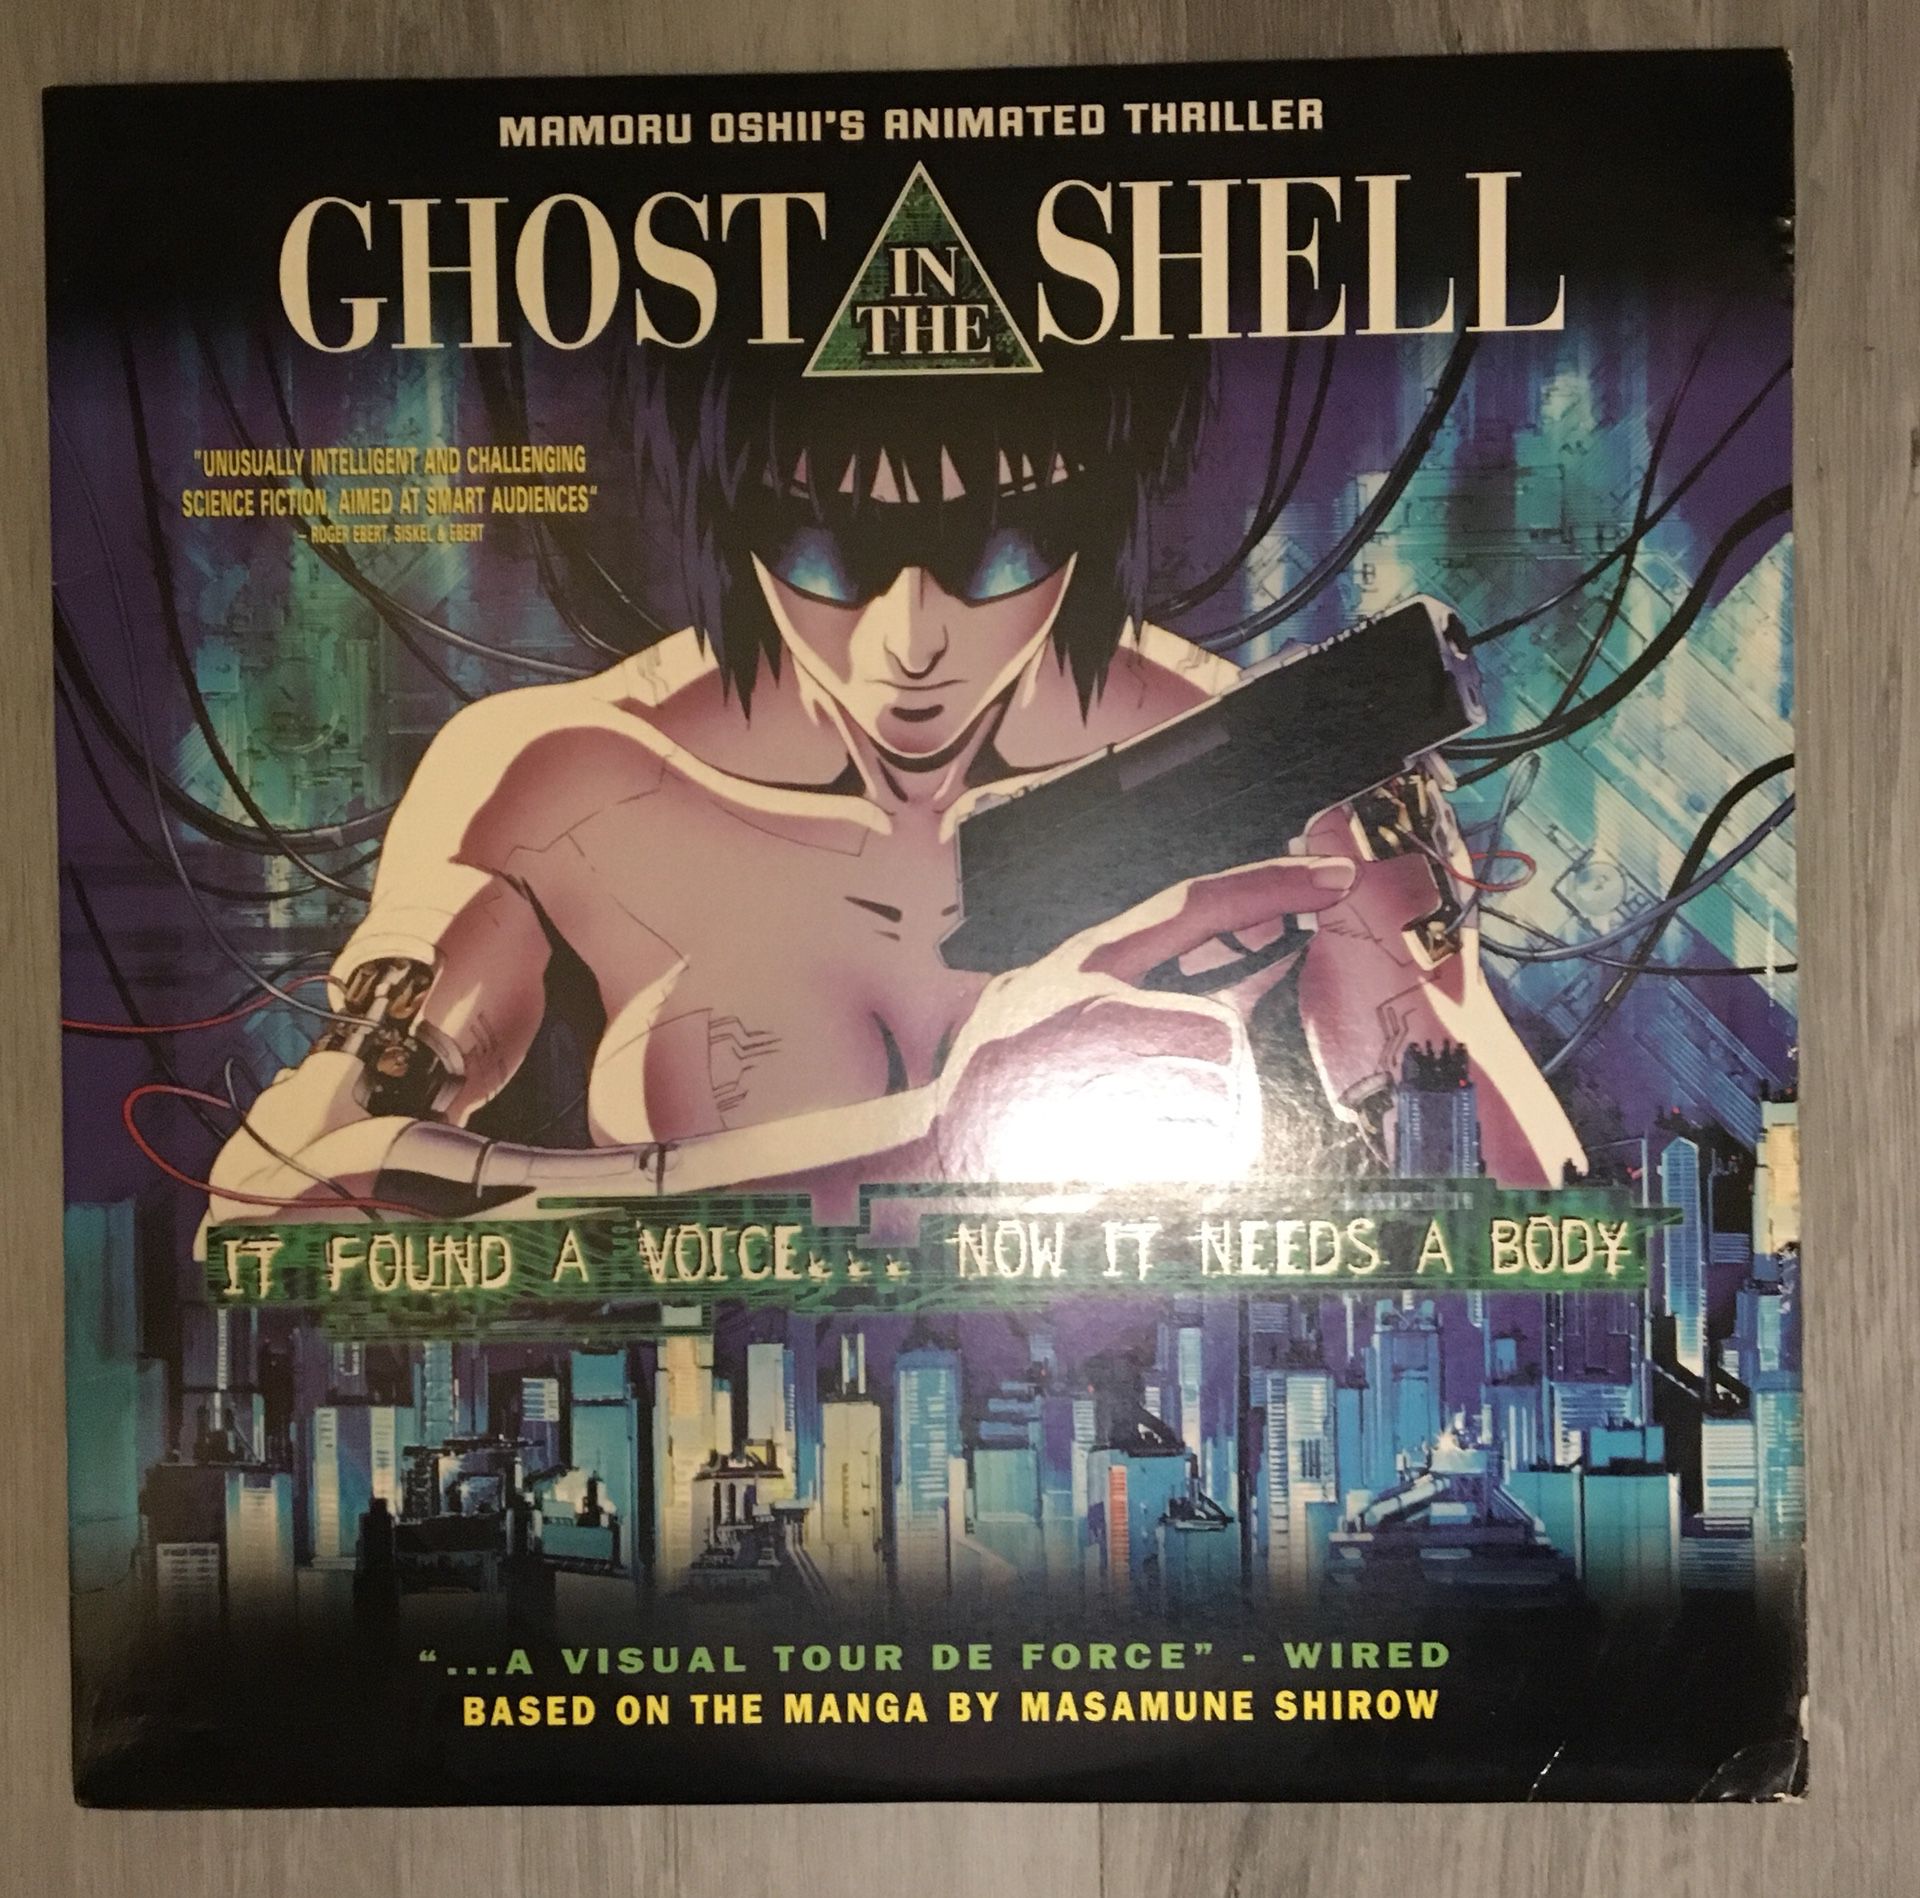 Ghost in the Shell on Laserdisc